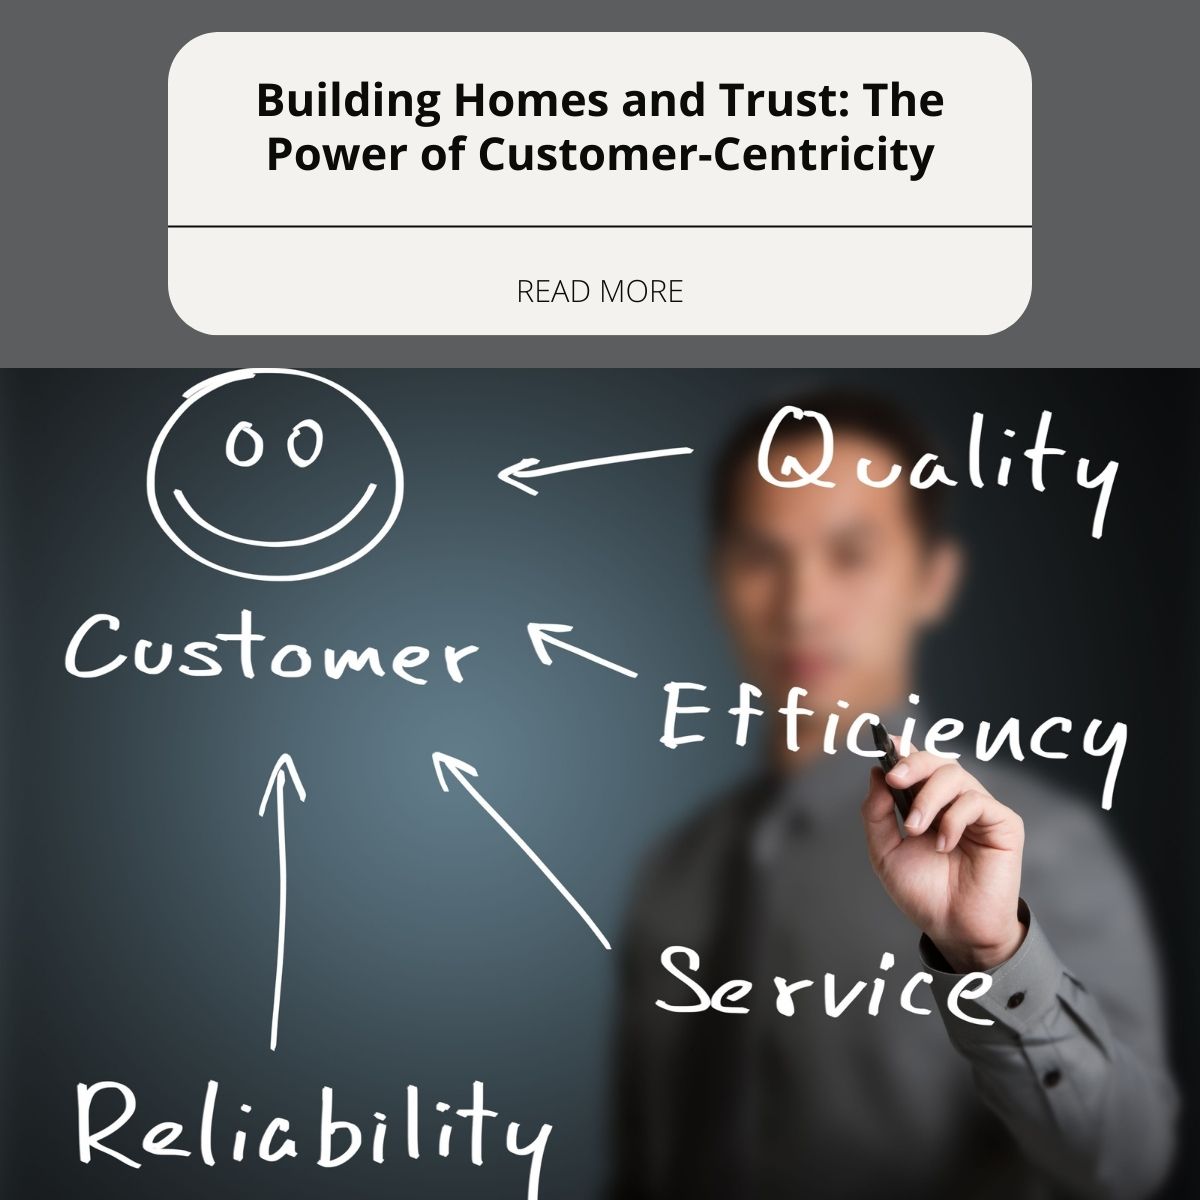 Building Homes and Trust: The Power of Customer-Centricity